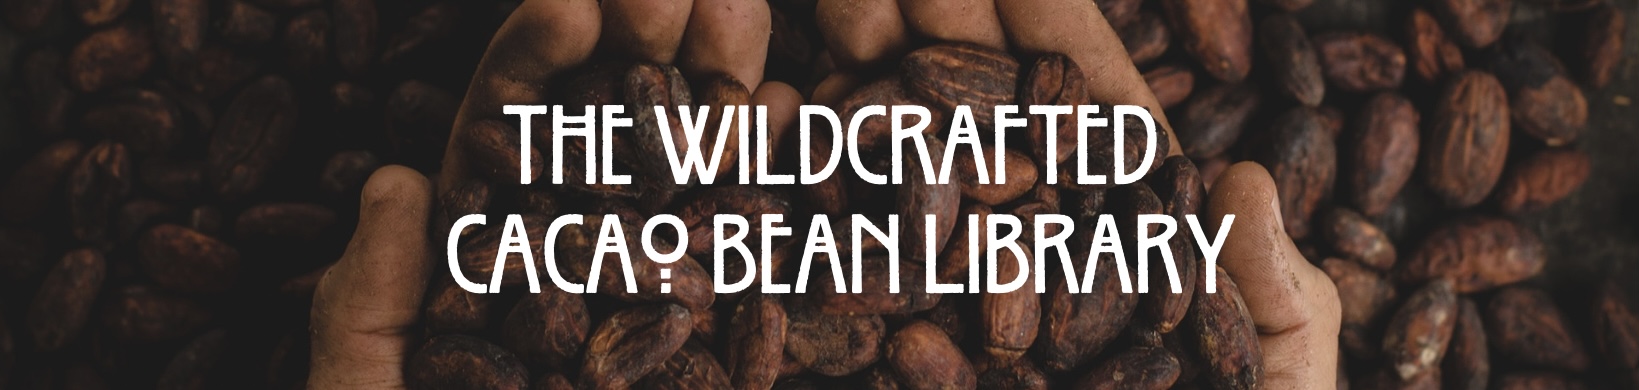 Wildcrafted Cacao Bean Library